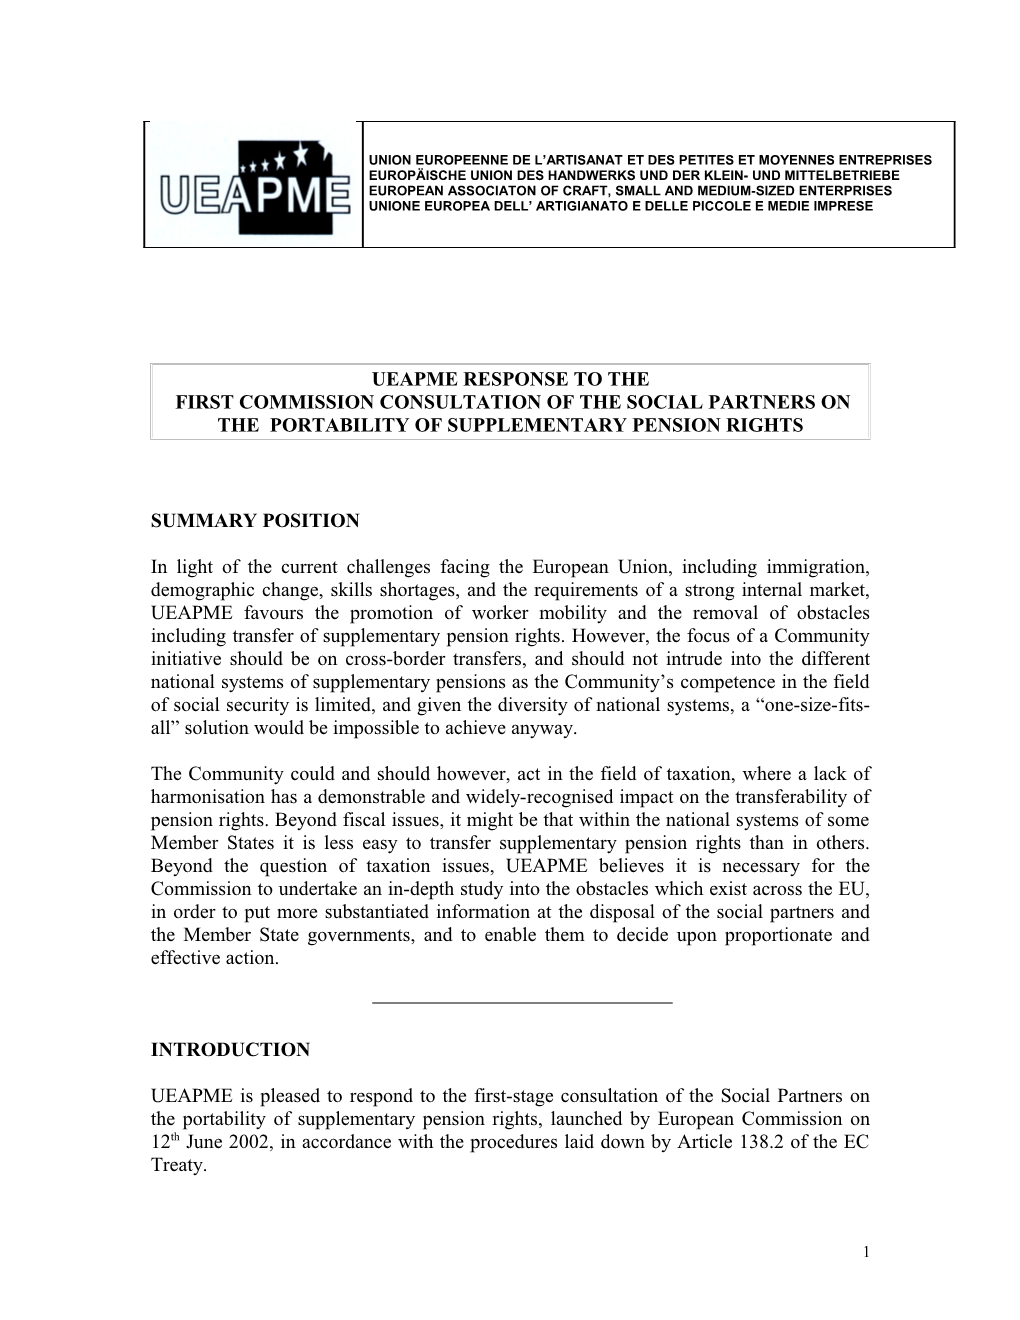 Draft Ueapme Response to the First Commission Consultation of The